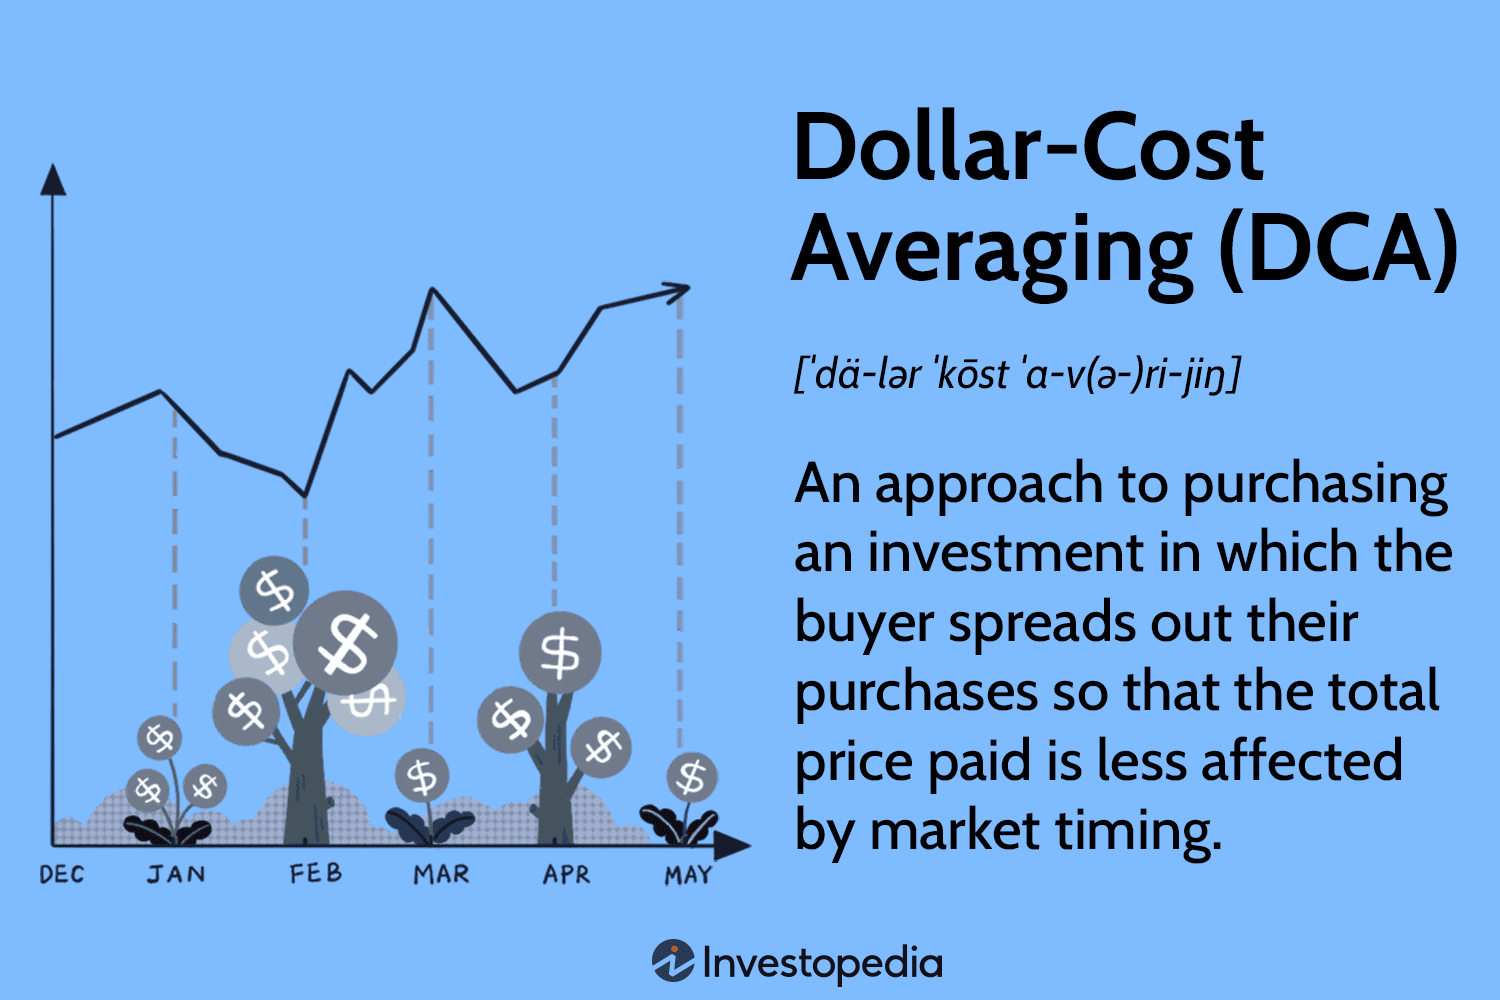 Dollar-Cost Averaging (DCA) Explained With Examples and Considerations